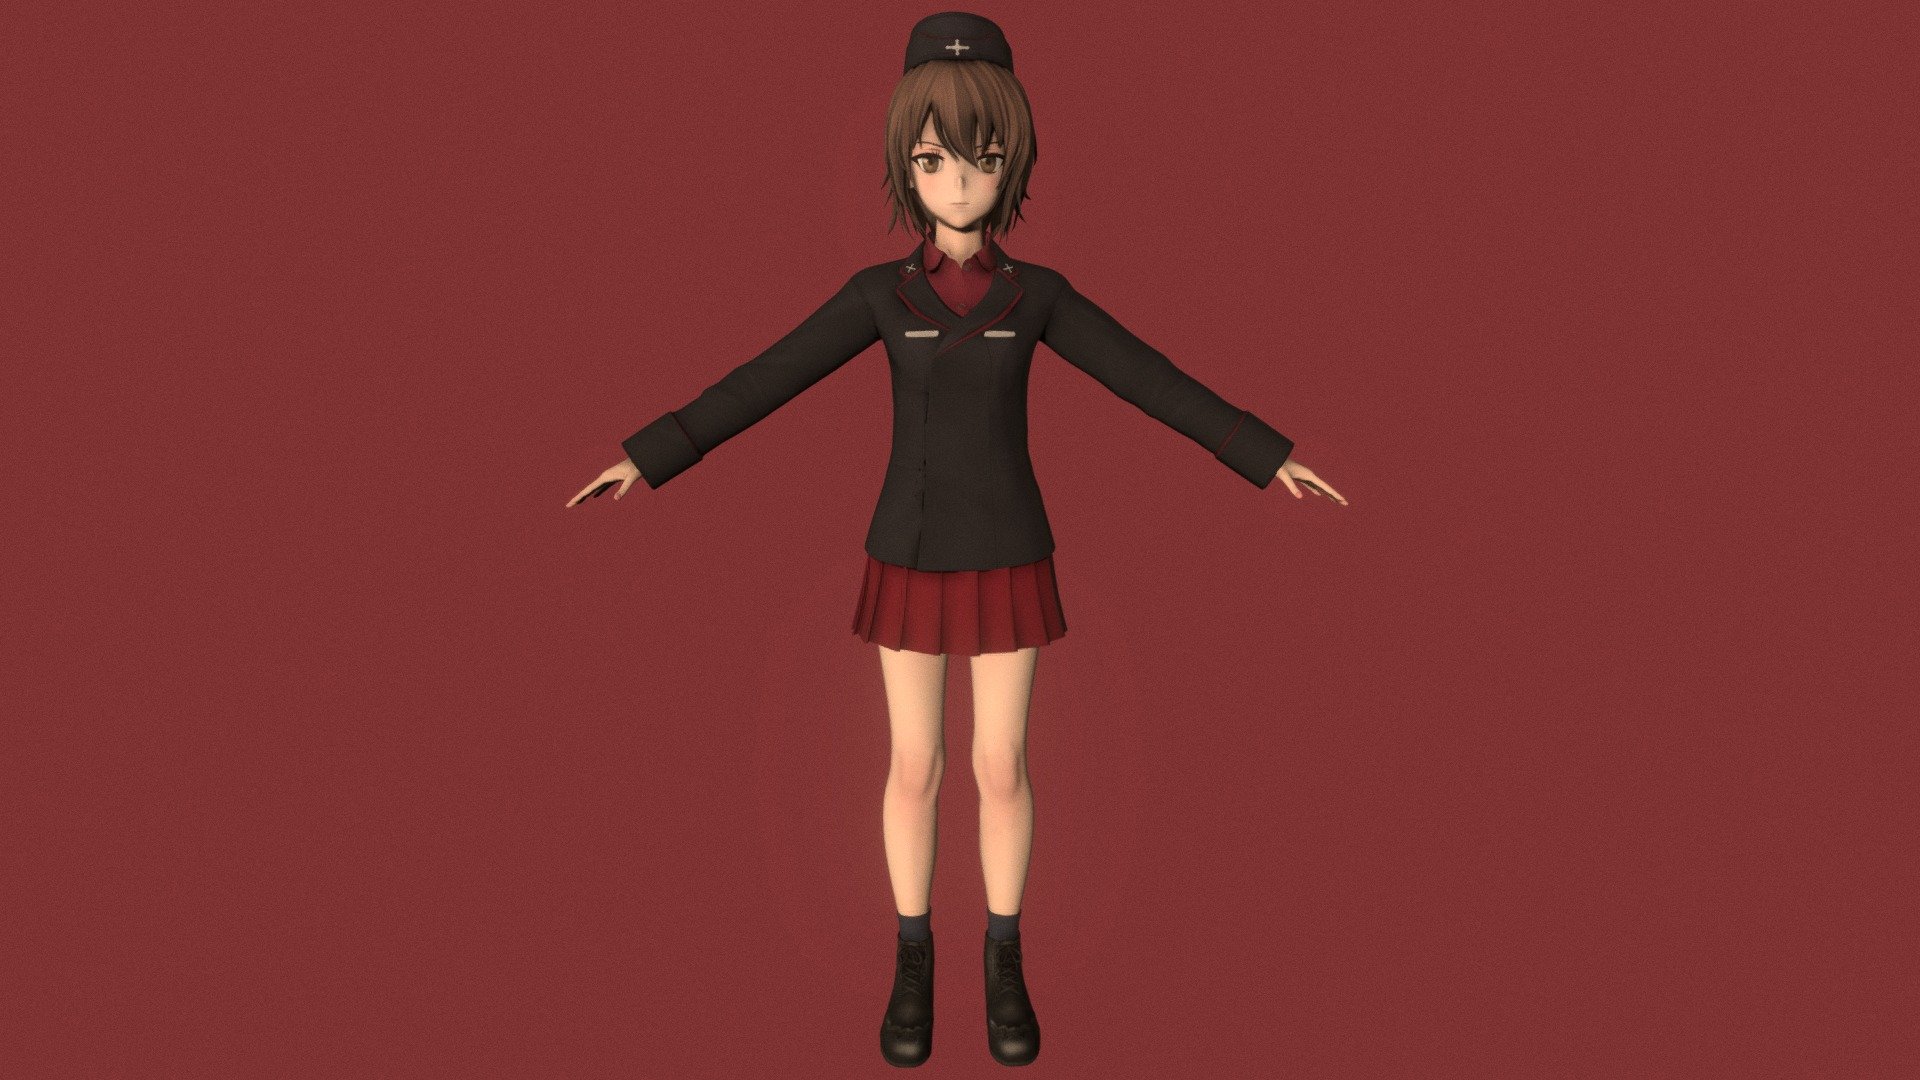 T-pose rigged model of anime girl Maho Nishizumi (Girls und Panzer).

Body and clothings are rigged and skinned by 3ds Max CAT system.

Eye direction and facial animation controlled by Morpher modifier / Shape Keys / Blendshape.

This product include .FBX (ver. 7200) and .MAX (ver. 2010) files.

3ds Max version is turbosmoothed to give a high quality render (as you can see here).

Original main body mesh have ~7.000 polys.

This 3D model may need some tweaking to adapt the rig system to games engine and other platforms.

I support convert model to various file formats (the rig data will be lost in this process): 3DS; AI; ASE; DAE; DWF; DWG; DXF; FLT; HTR; IGS; M3G; MQO; OBJ; SAT; STL; W3D; WRL; X.

You can buy all of my models in one pack to save cost: https://sketchfab.com/3d-models/all-of-my-anime-girls-c5a56156994e4193b9e8fa21a3b8360b

And I can make commission models.

If you have any questions, please leave a comment or contact me via my email 3d.eden.project@gmail.com 3d model